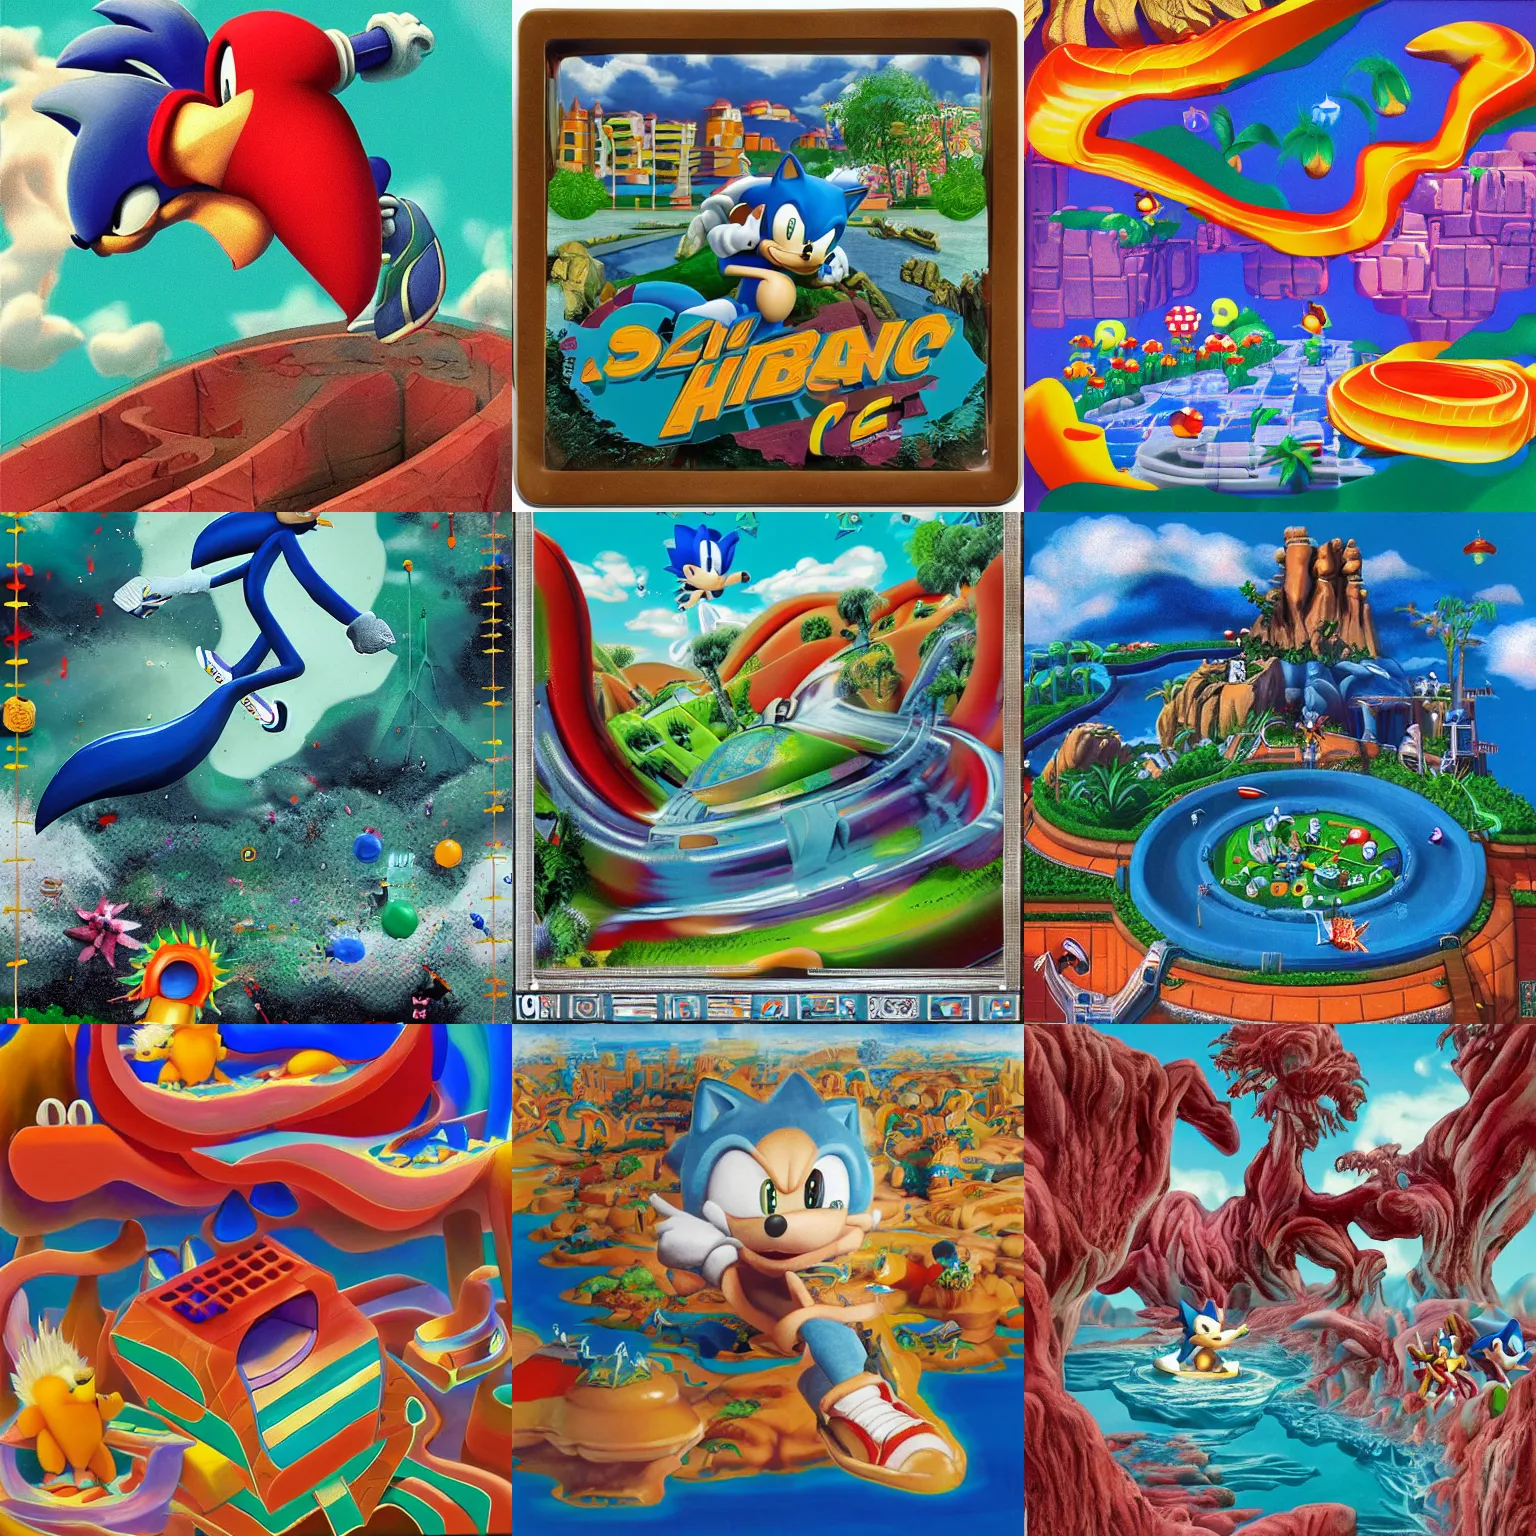 Prompt: dreaming of sonic hedgehog portrait deconstructivist claymation sega matte painting landscape of a surreal sharp, jazz cup detailed professional soft pastels high quality airbrush art album cover liquid dissolving airbrush art lsd sonic the hedgehog swimming through cyberspace teal checkerboard background 1 9 9 0 s 1 9 9 2 sega genesis rareware video game album cover